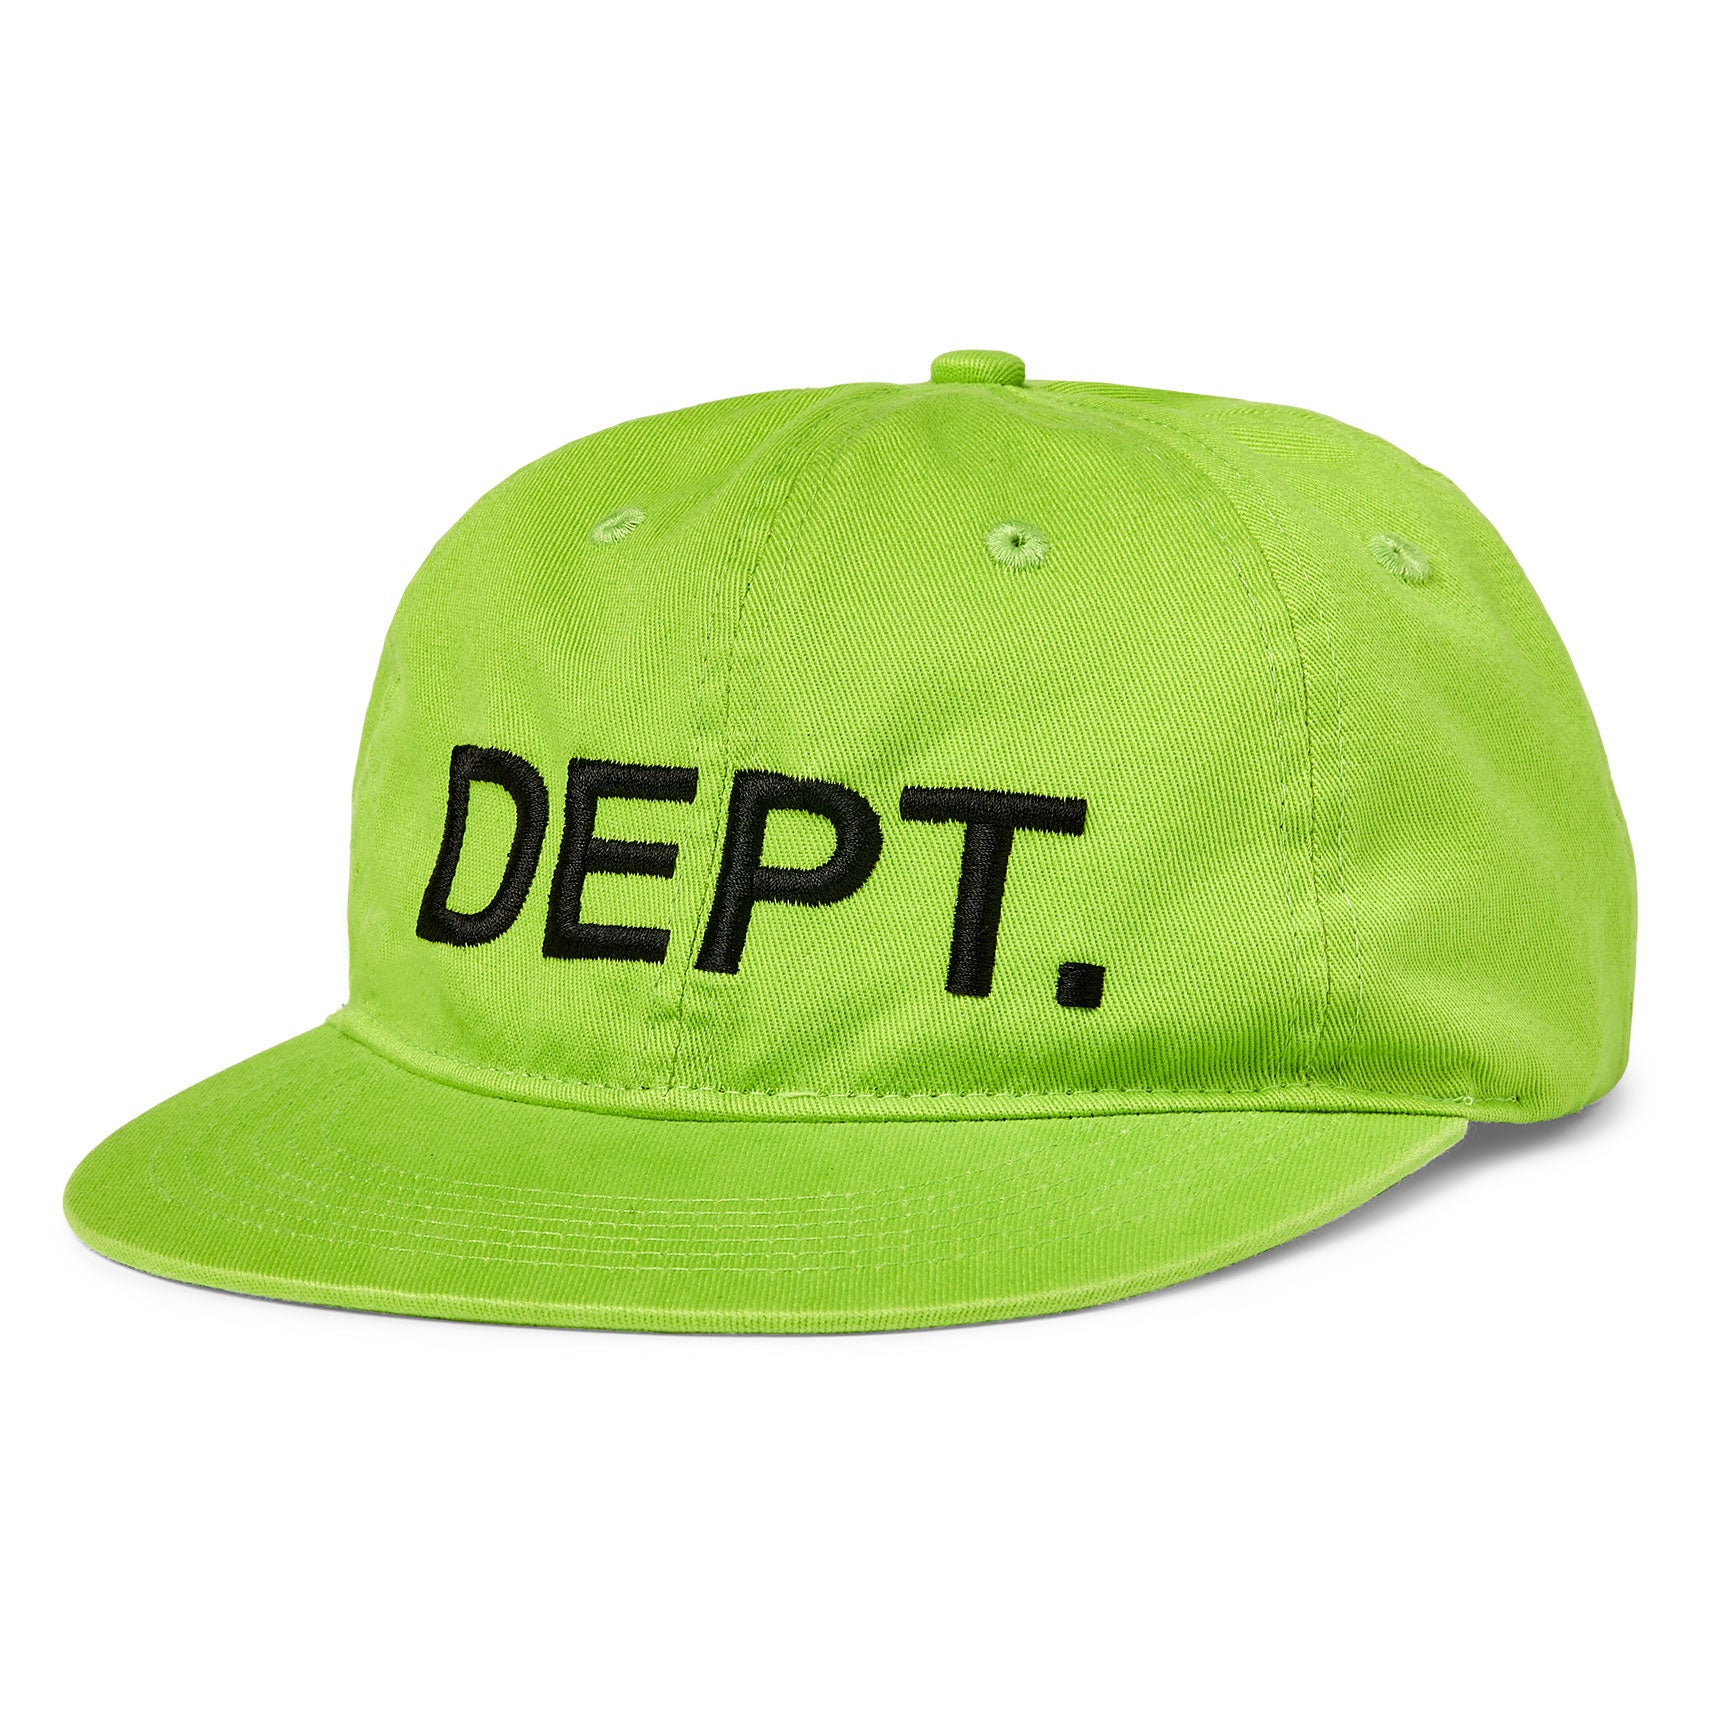 GALLERY DEPT GREEN HAT || Gallery Dept Clothing || New Stock